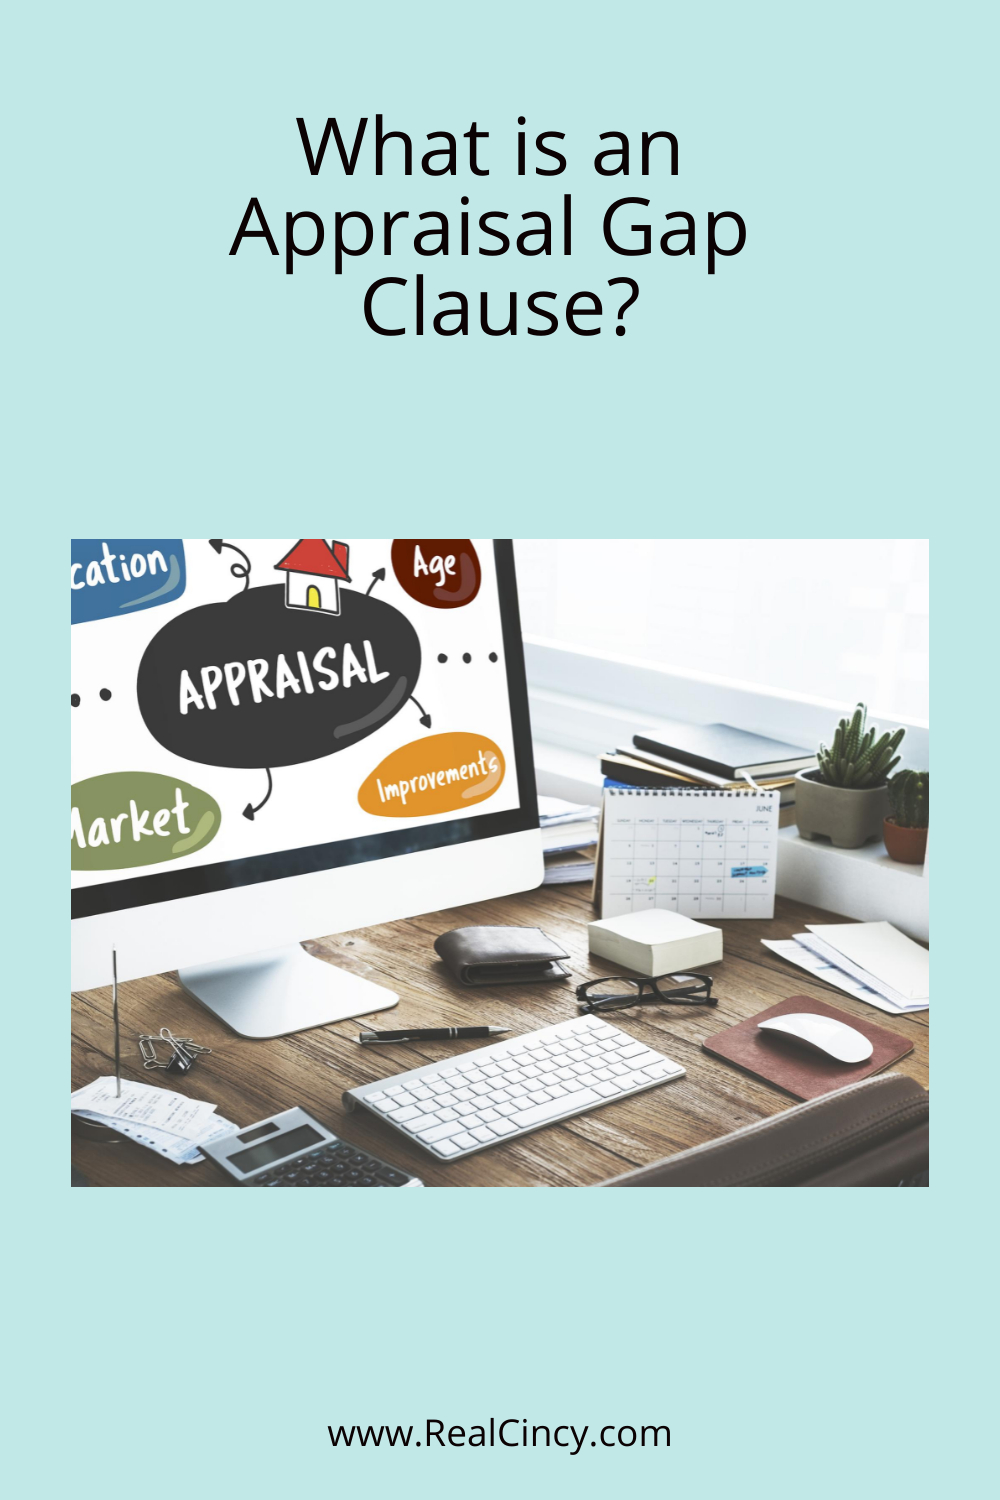 What is an Appraisal Gap Clause?